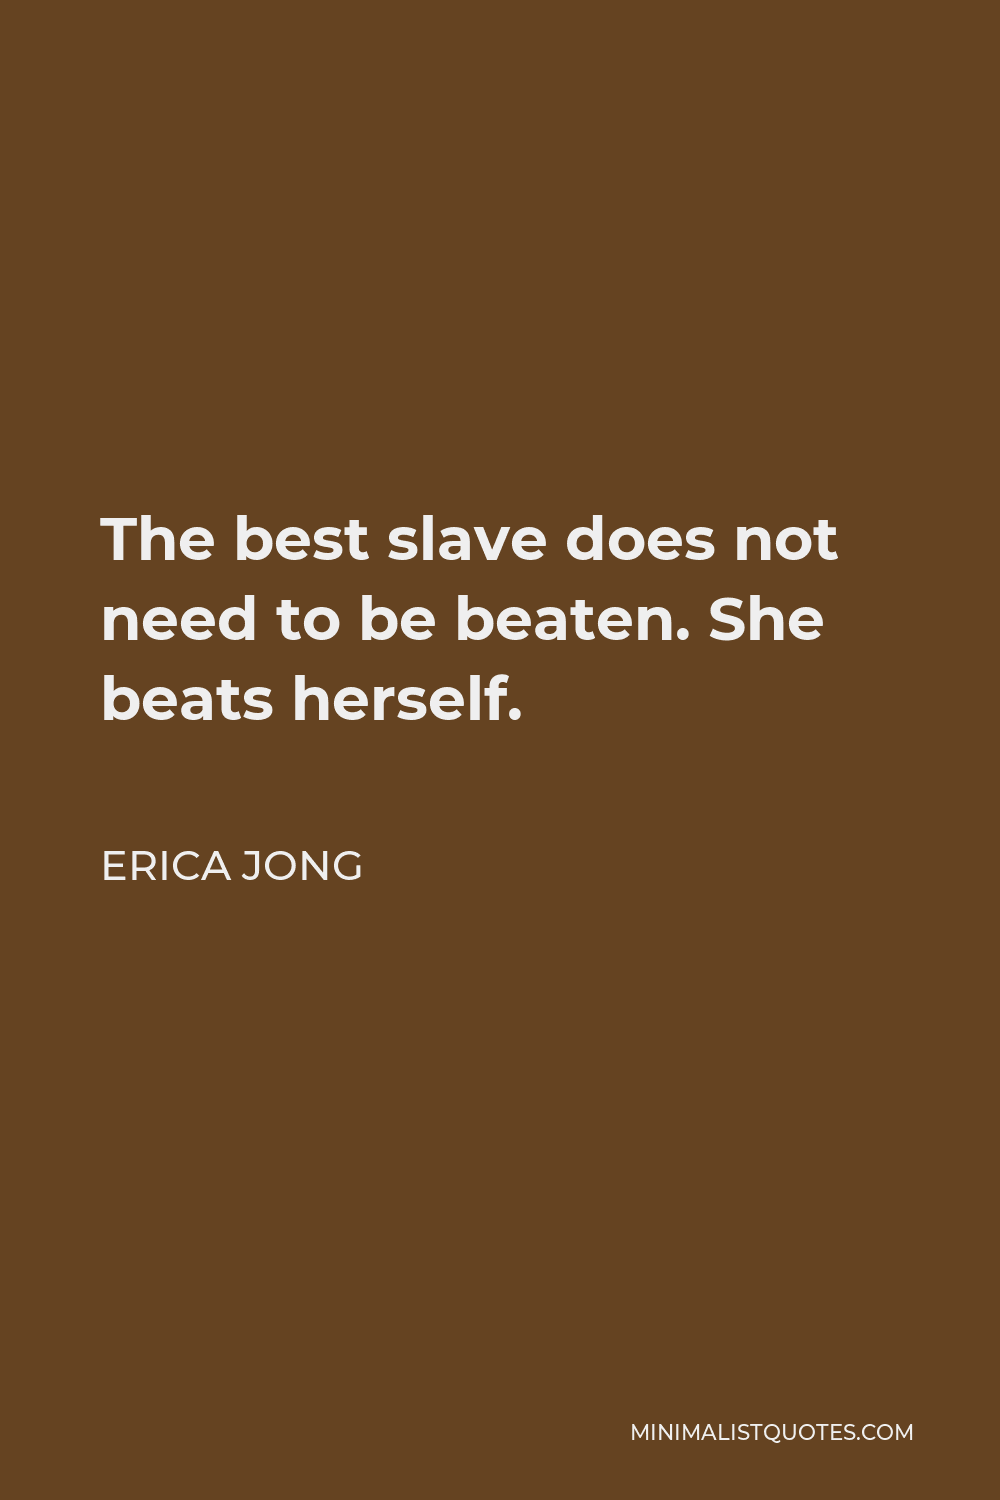 Erica Jong Quote - The best slave does not need to be beaten. She beats herself.